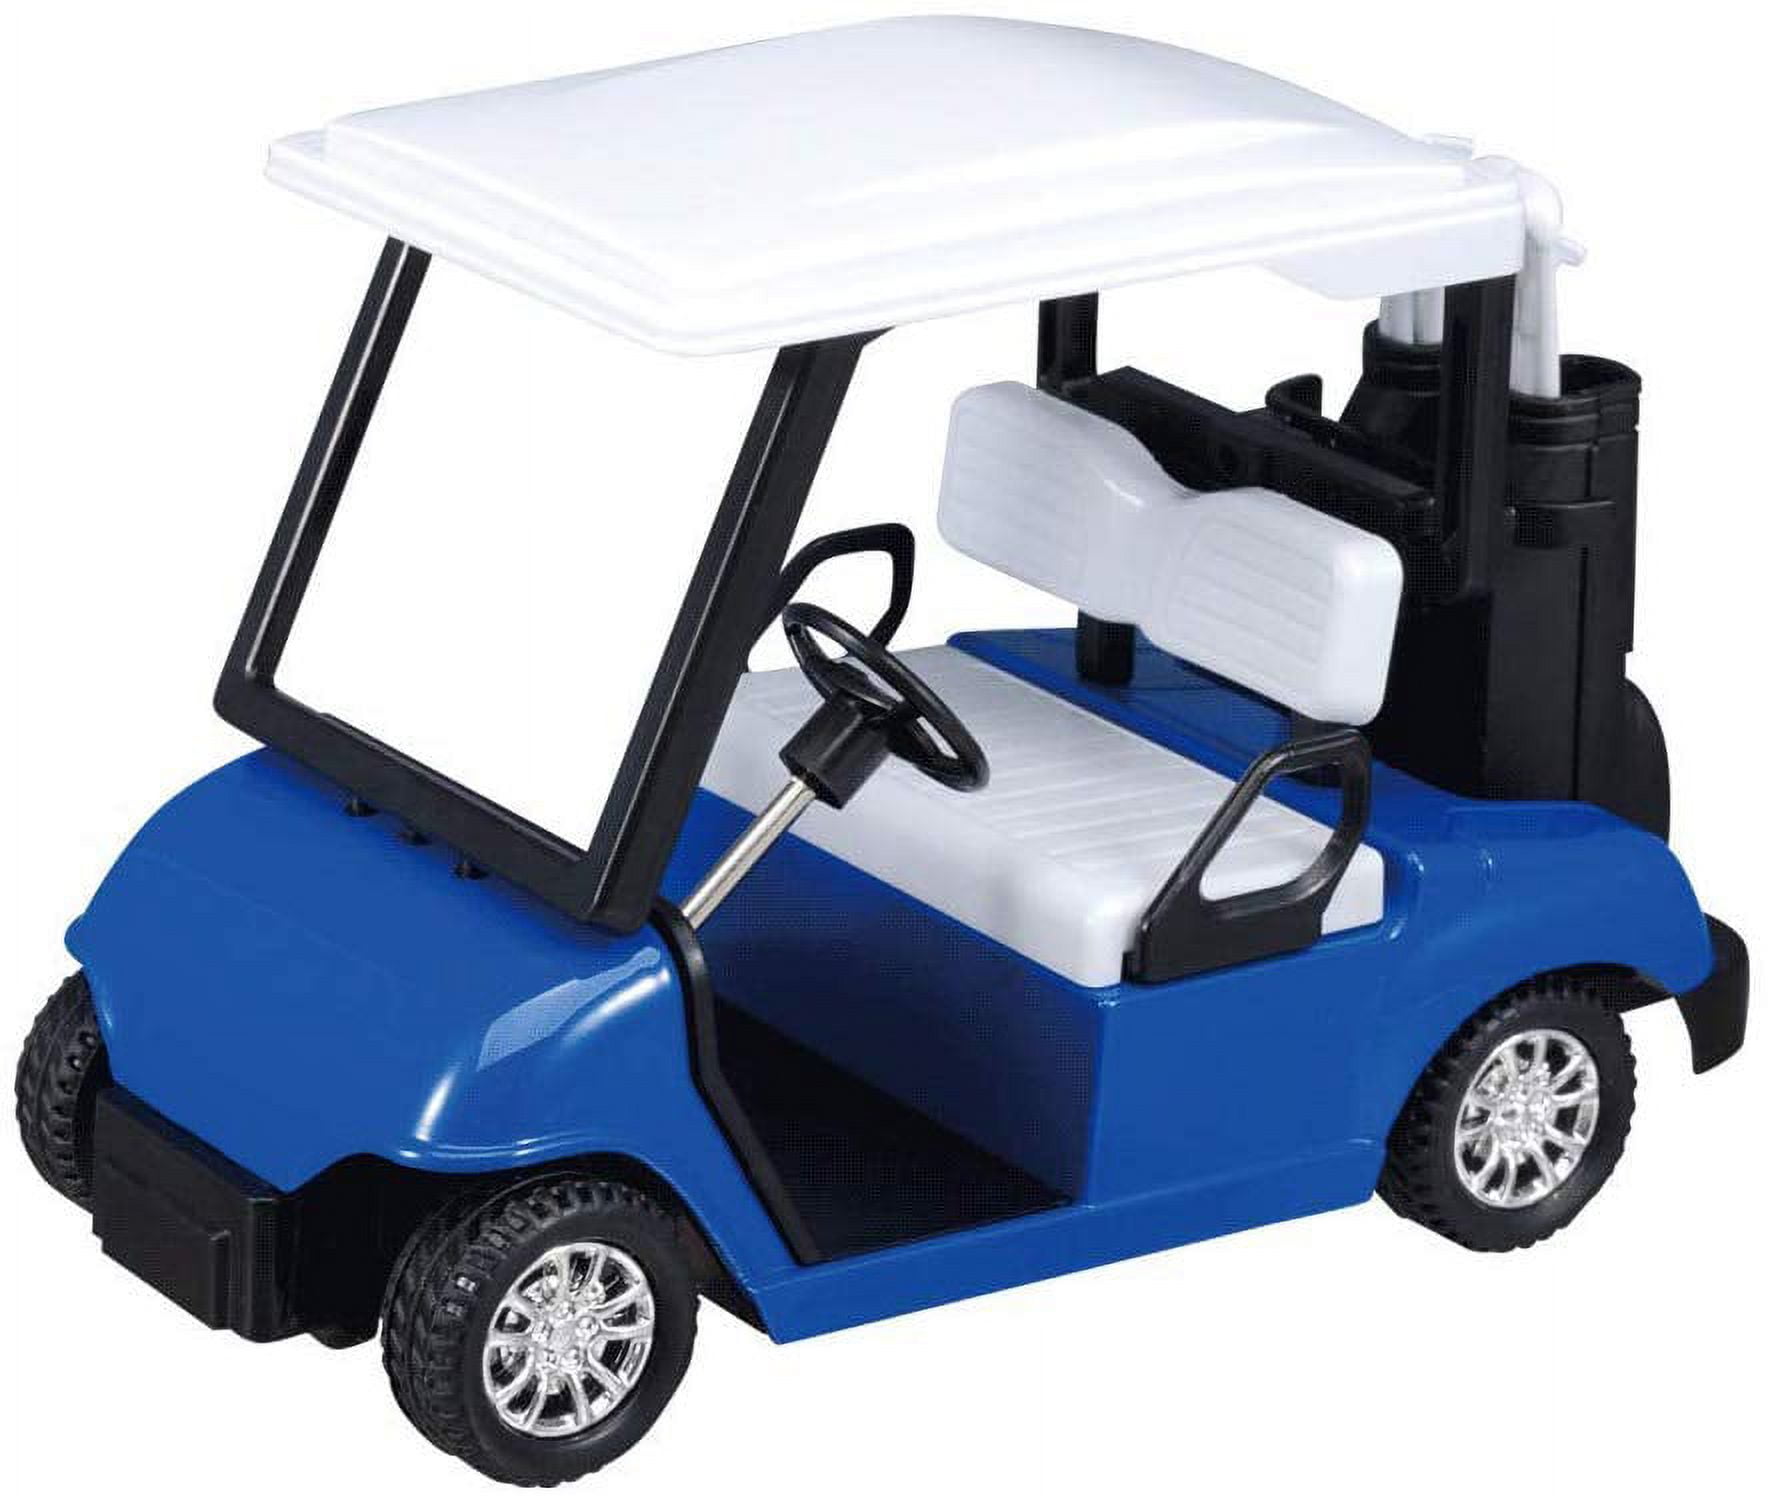 Promotional 5 Inch Die-Cast Metal Golf Cart Toys - Toys - Fun, Games & Music